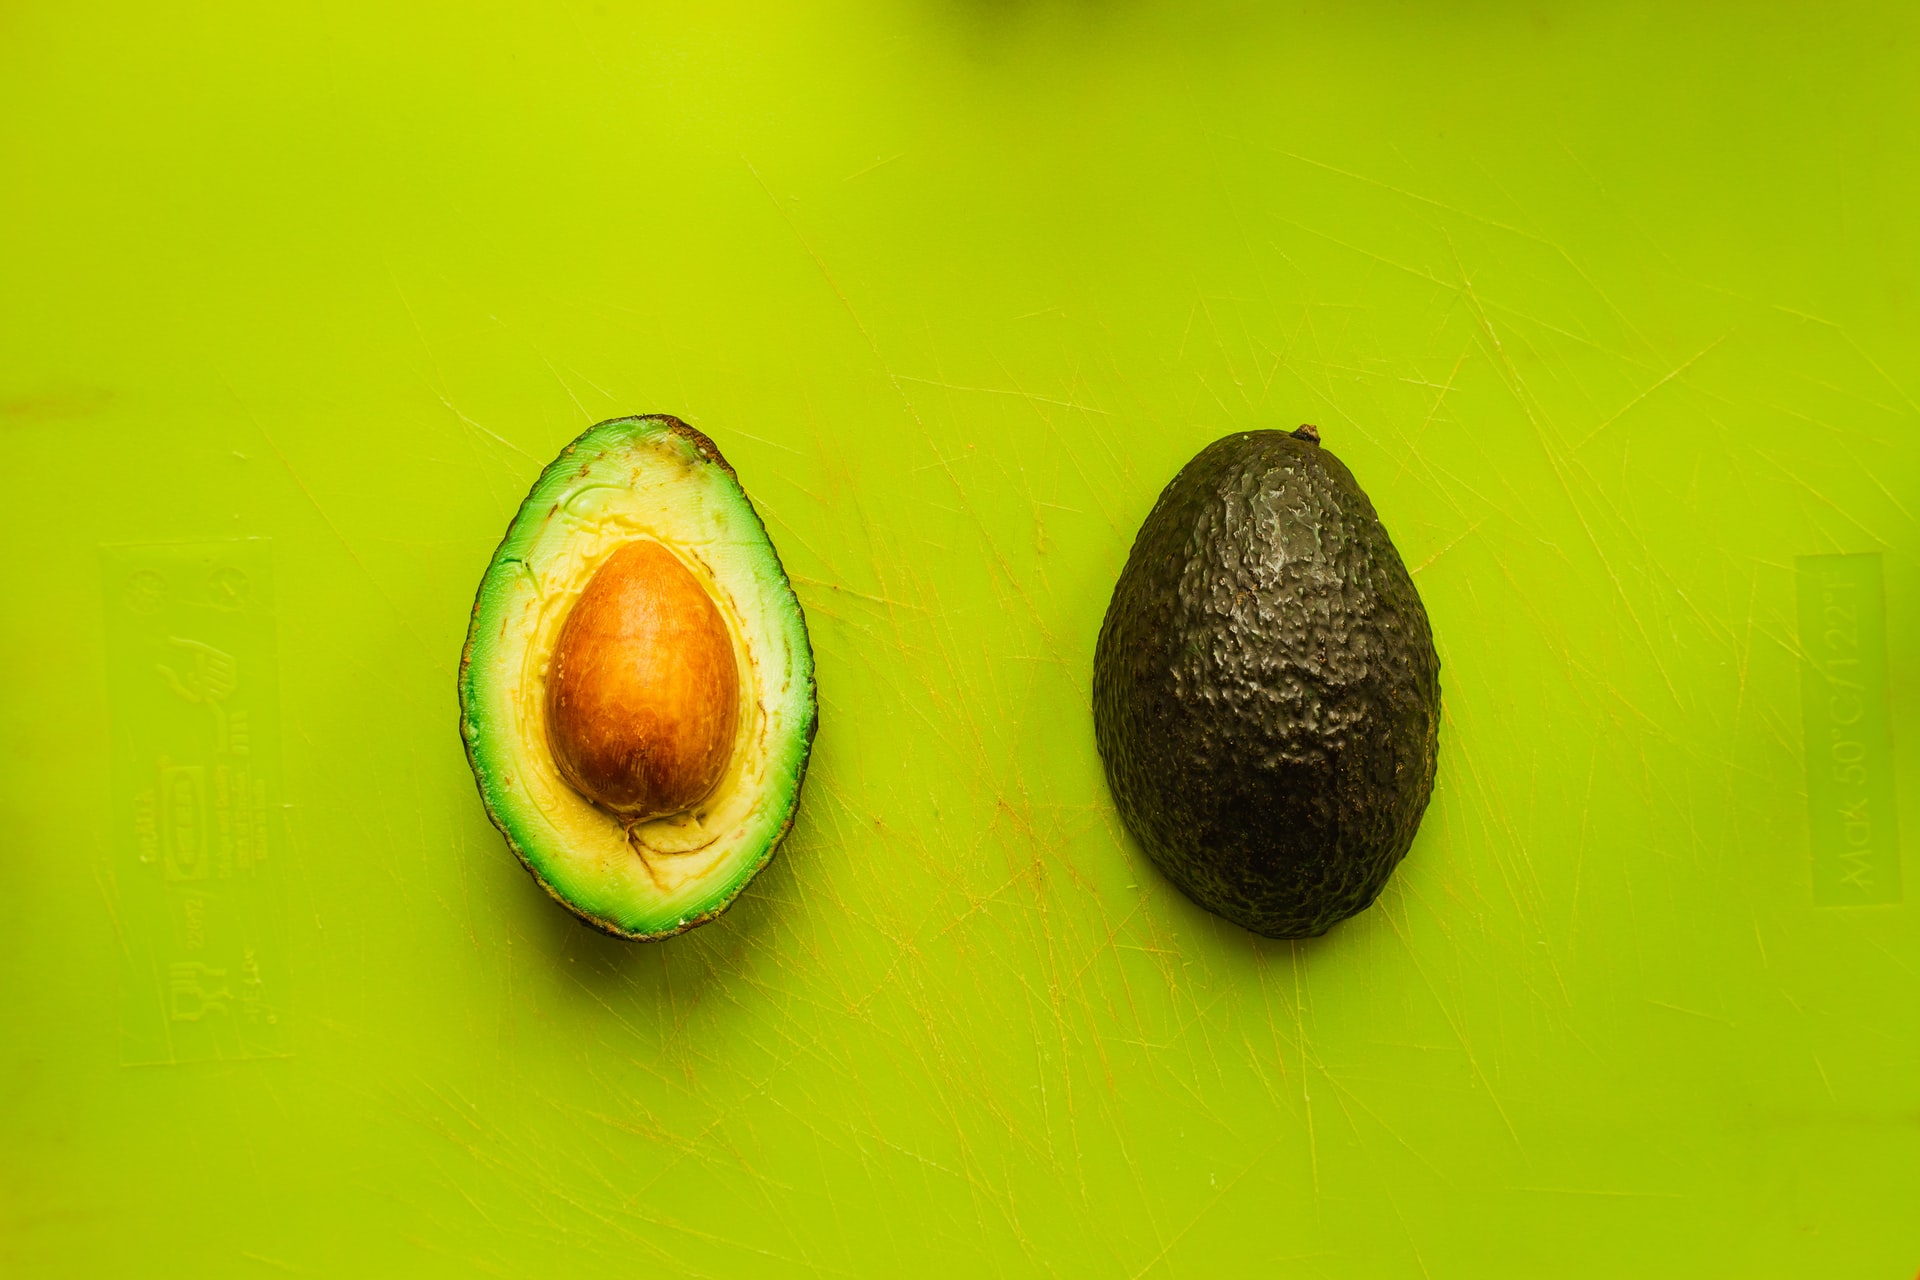 How to Plant Your First Avocado During Quarantine 2